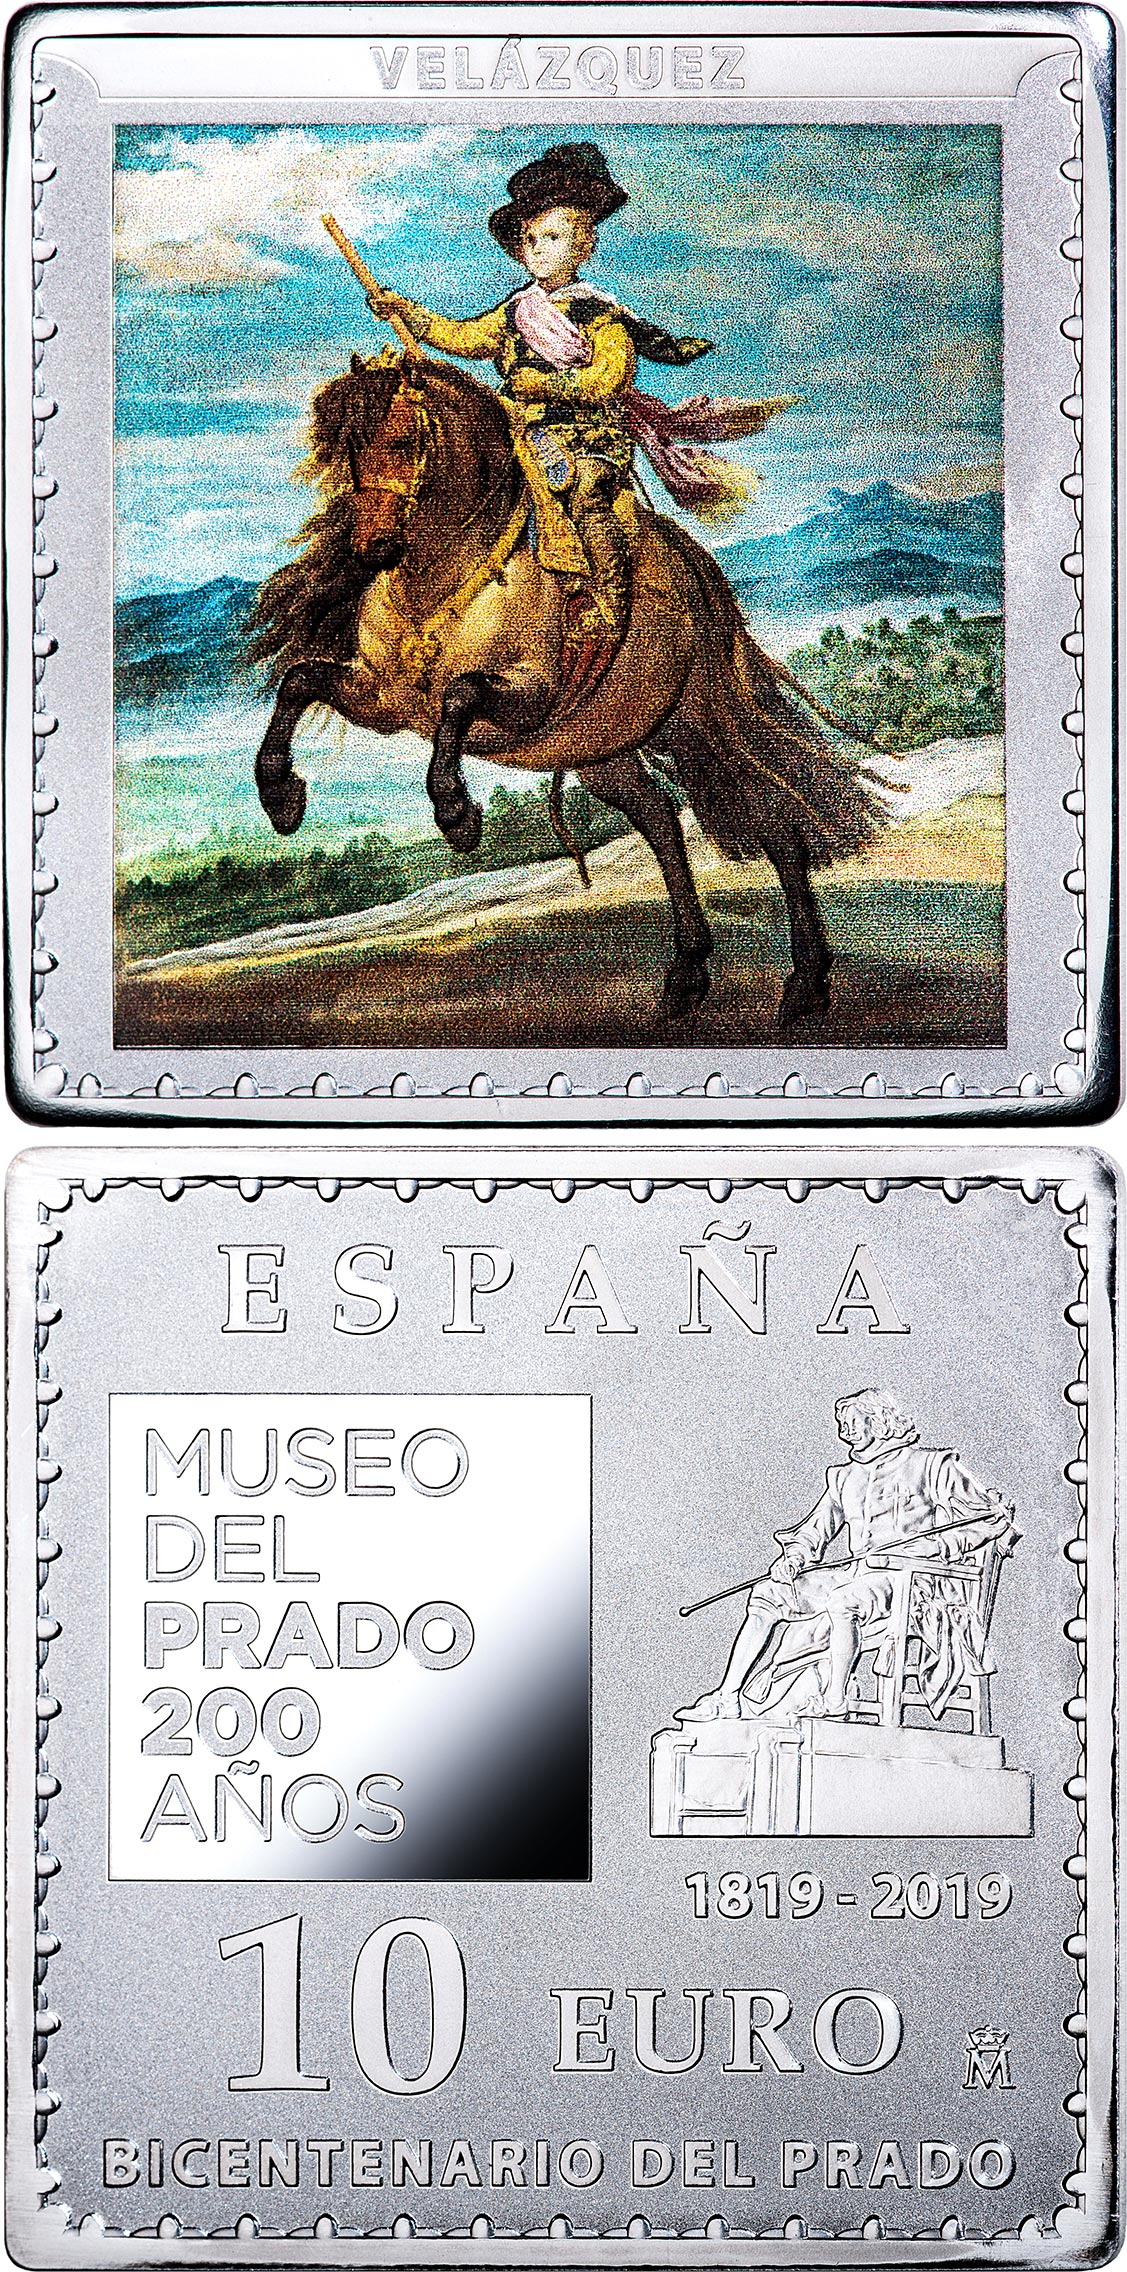 Image of 10 euro coin - Bicentenary of the Museum del Prado - Prince Baltasar Carlos, on horseback | Spain 2019.  The Silver coin is of Proof quality.